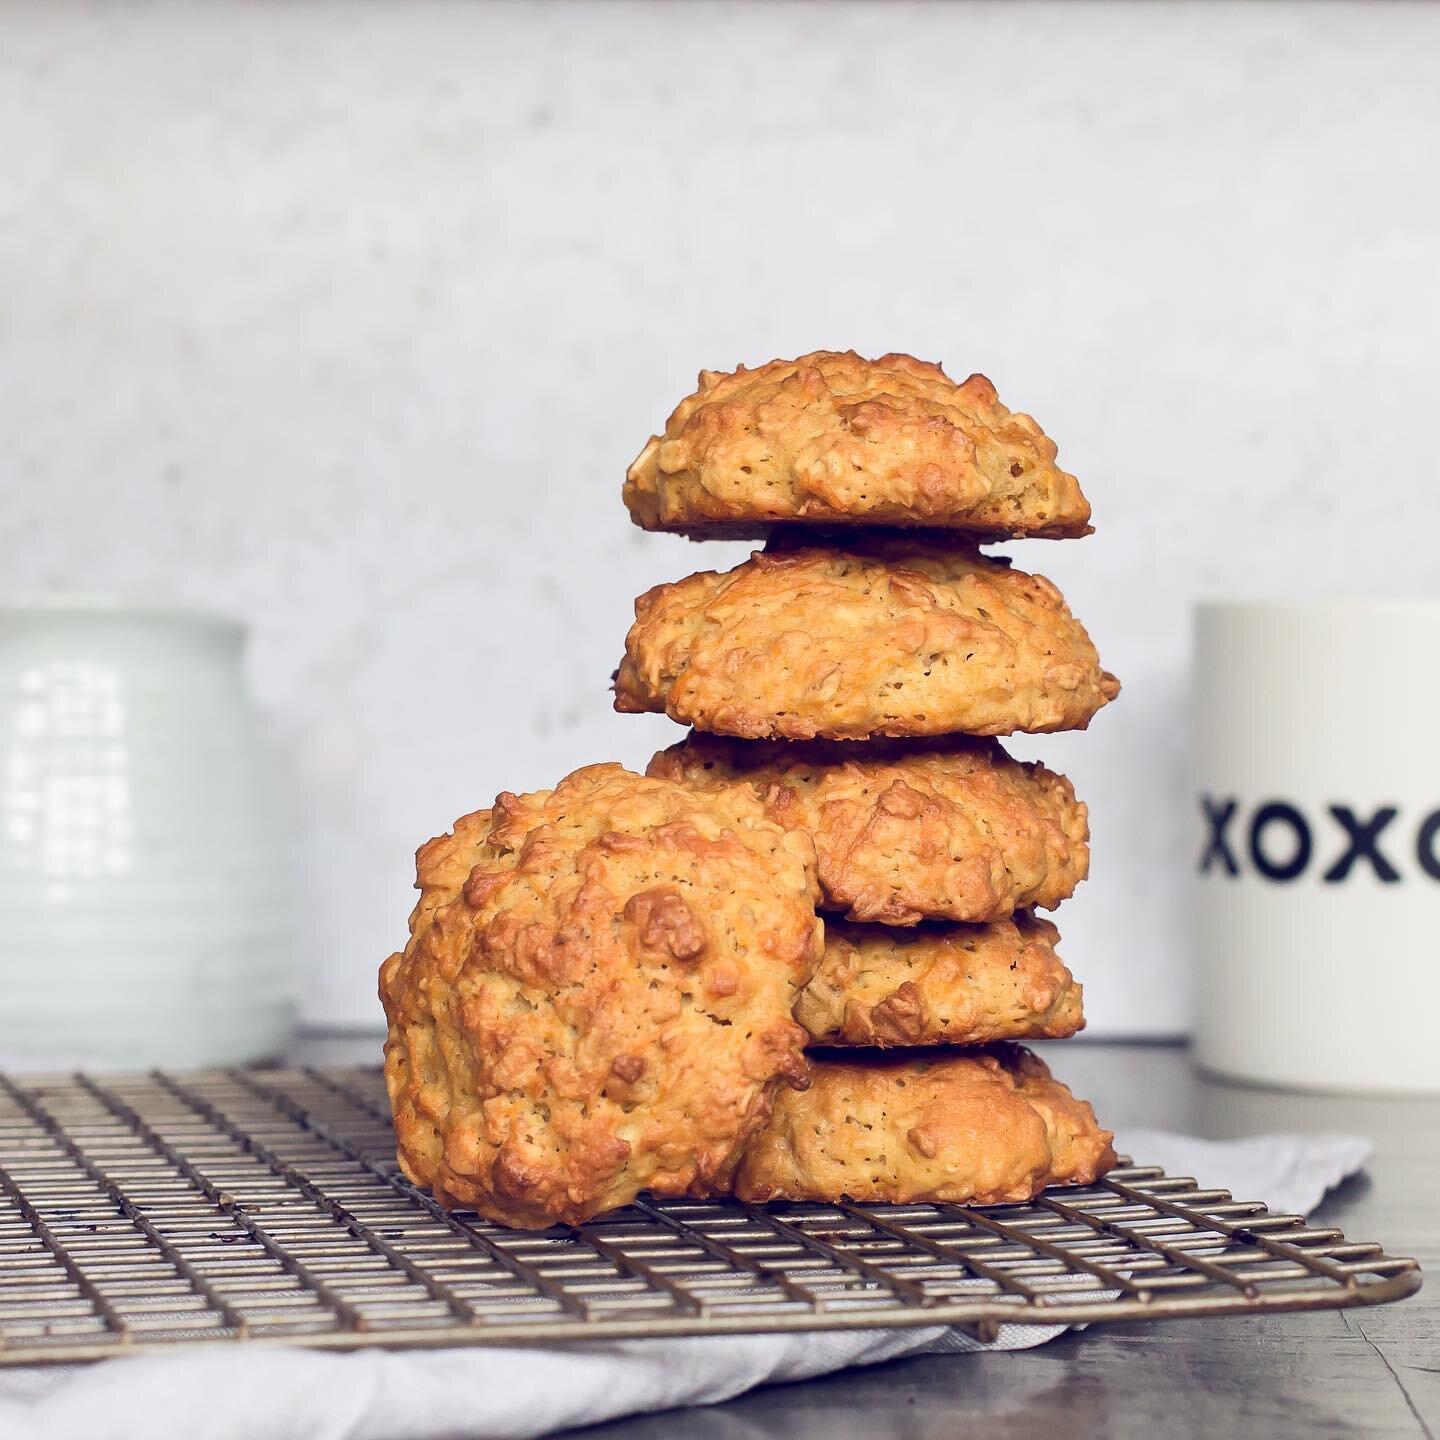 When we lived in Toronto we used to go to @roostercoffee every weekend. These cookies are our version of their delicious Breakfast Cookies.
Filled with oats, raisins, carrots and warm spices, these little bites are a real treat. Barely sweeten with a